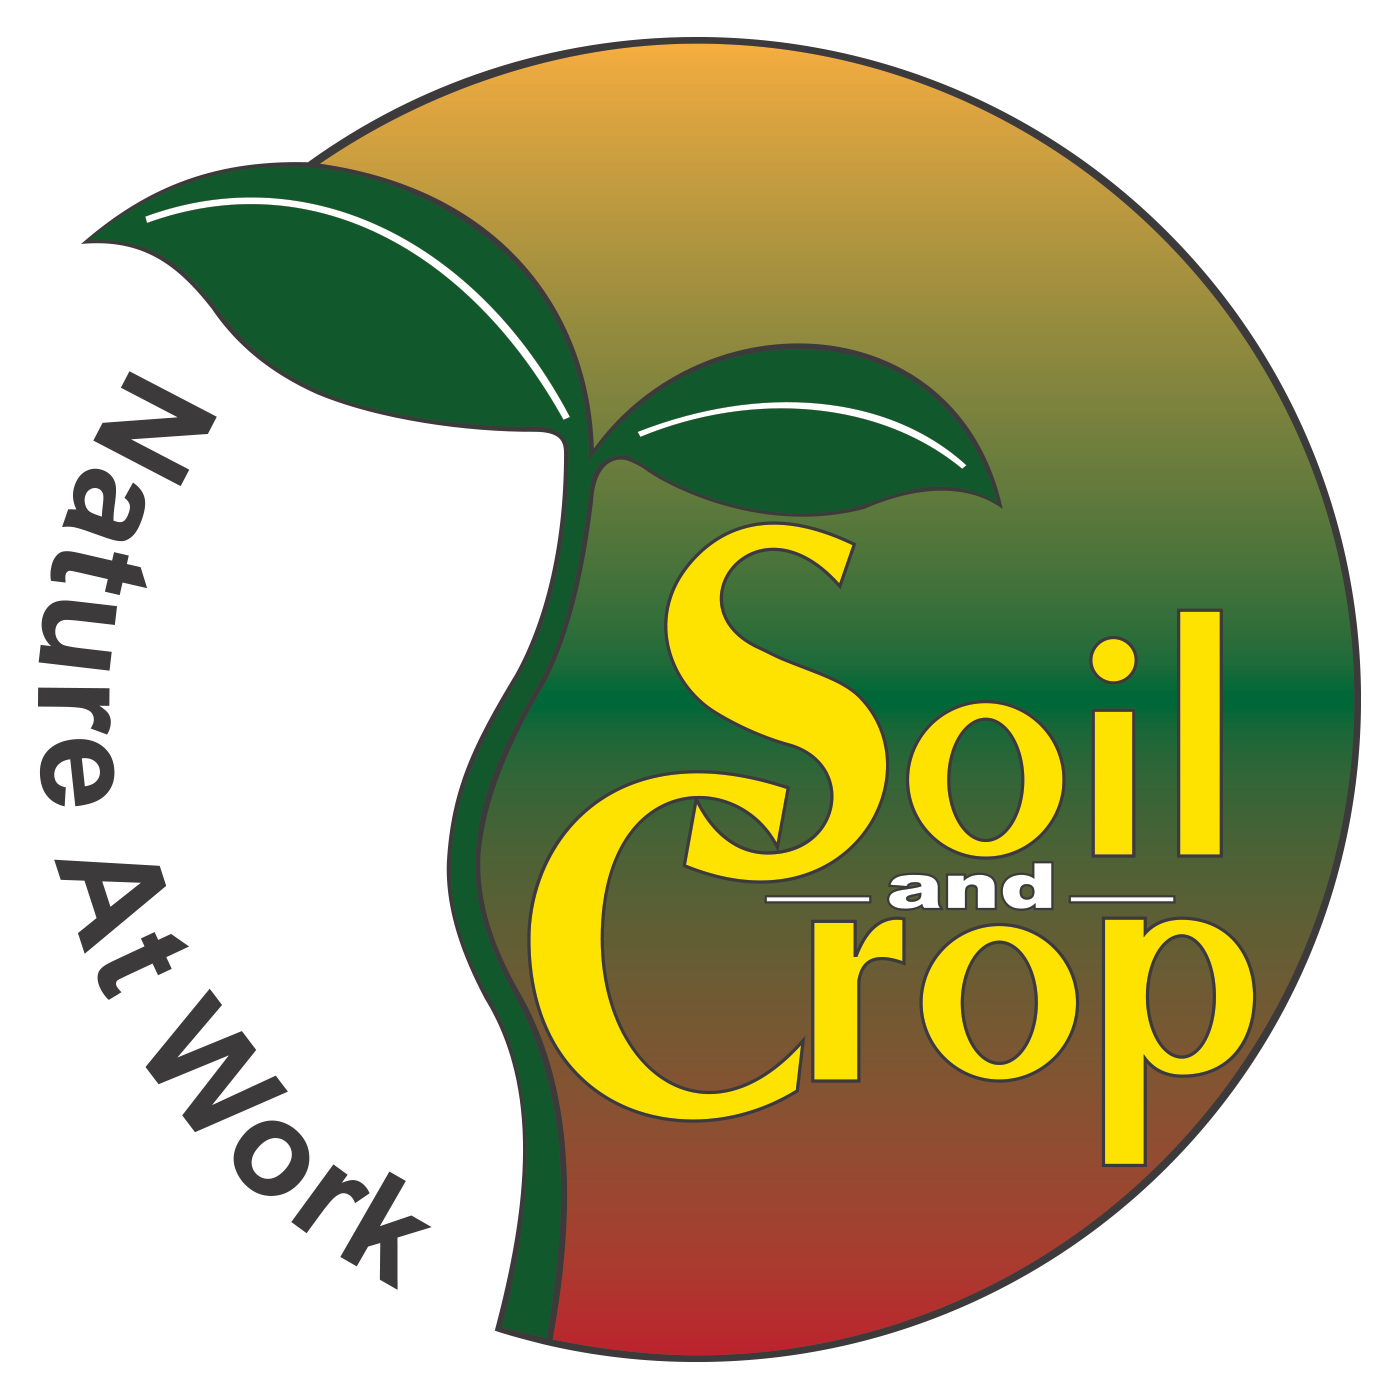 Soil and Crop